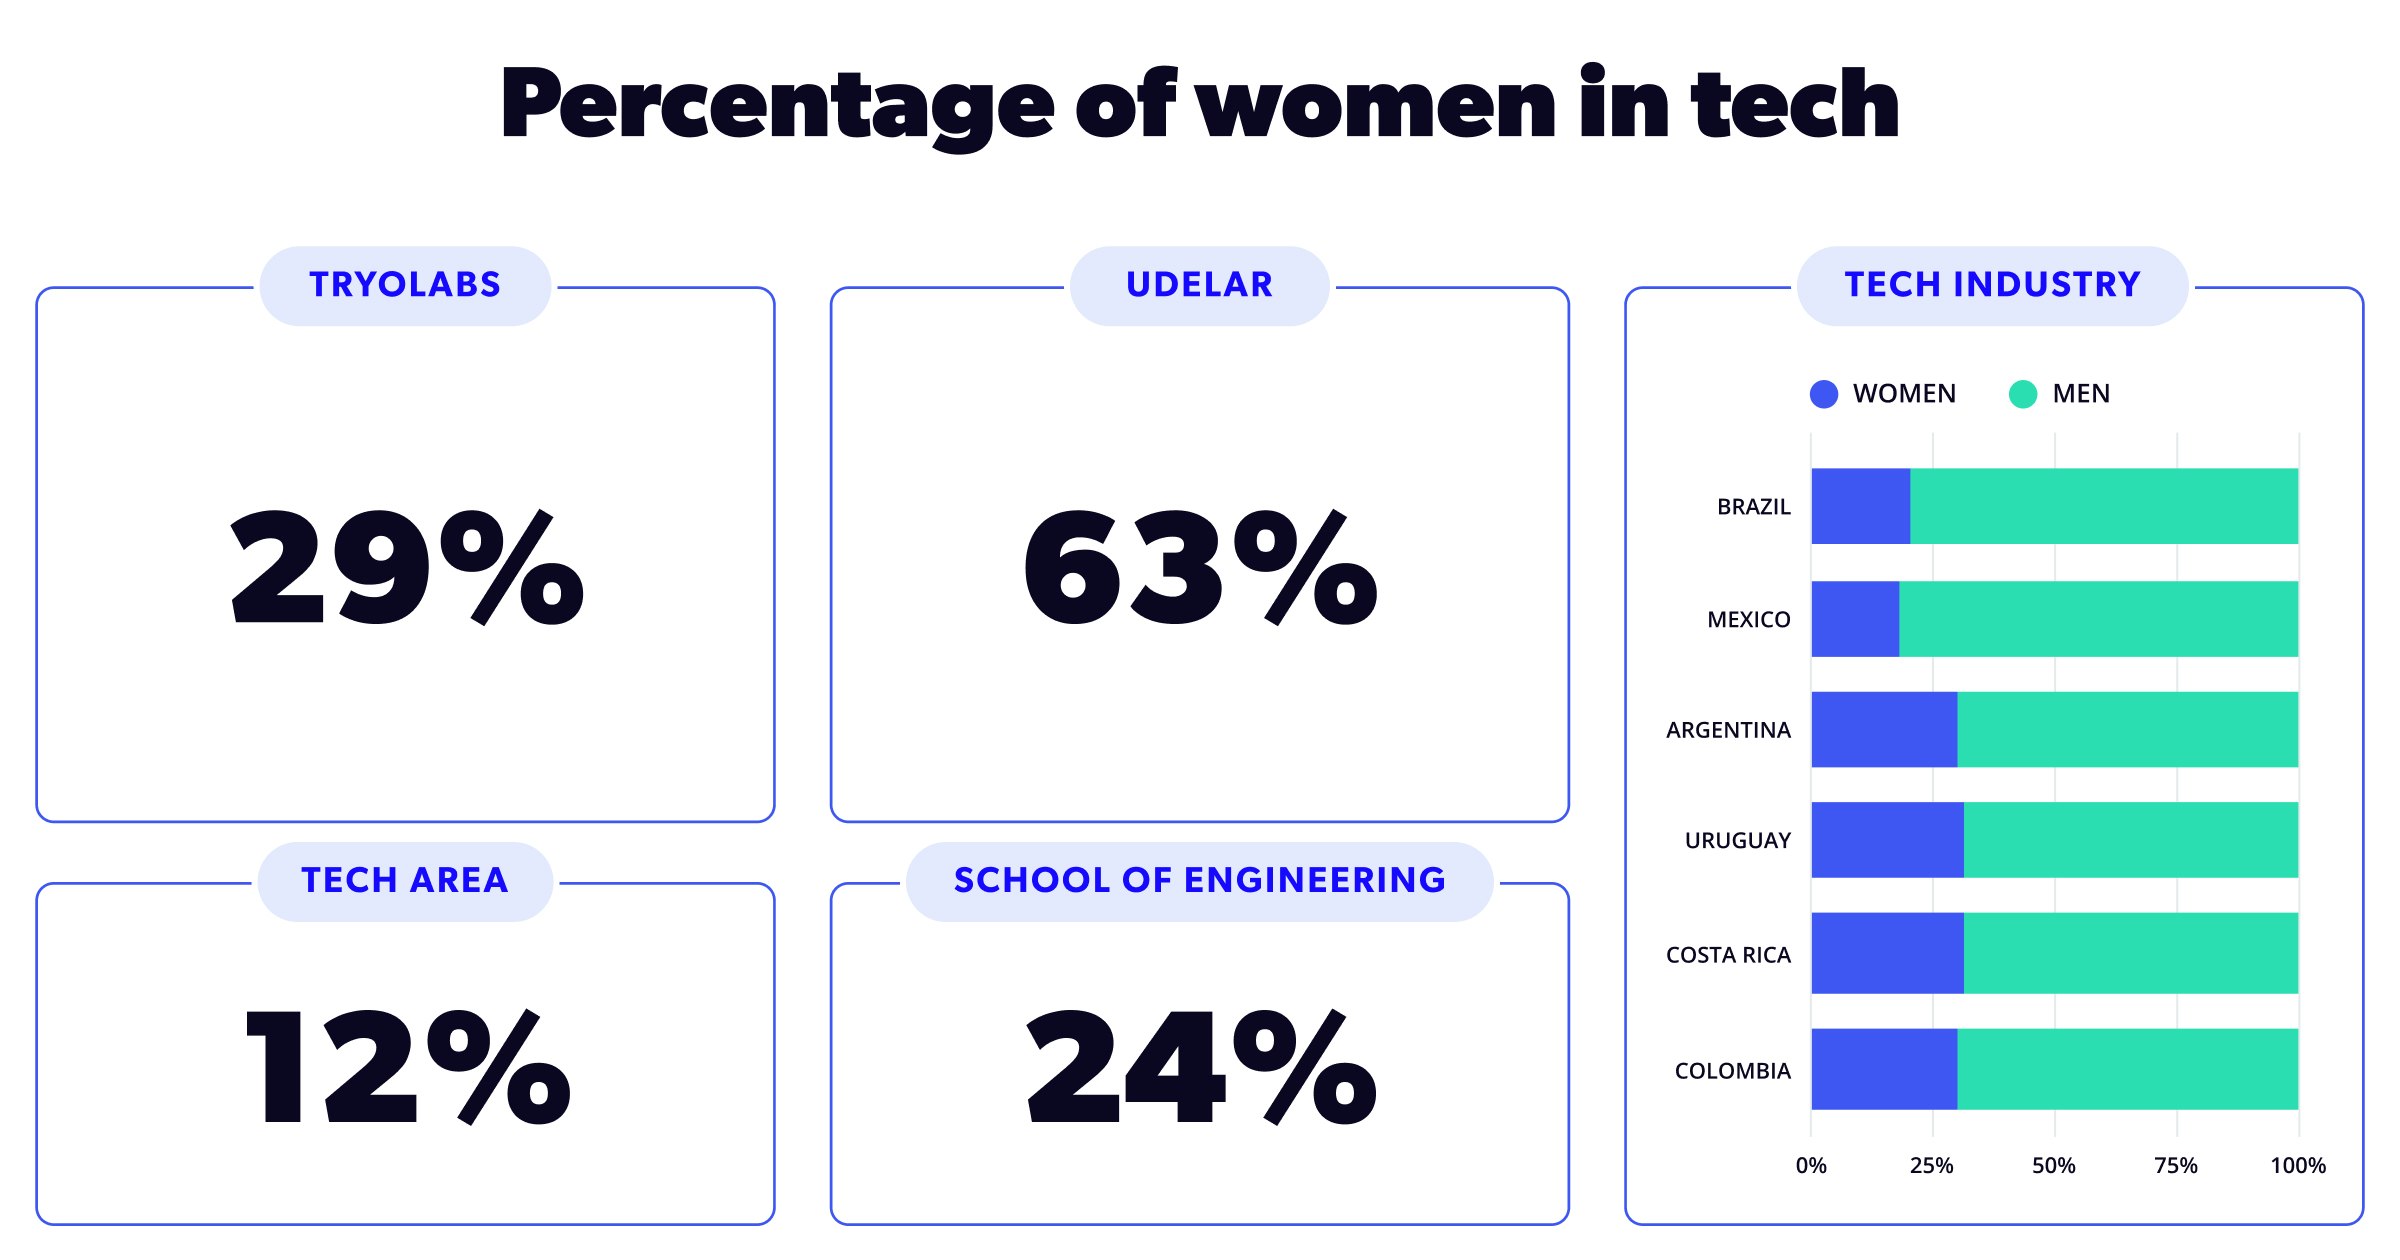 Graphic showing the percentage of women in tech through different scenarios.